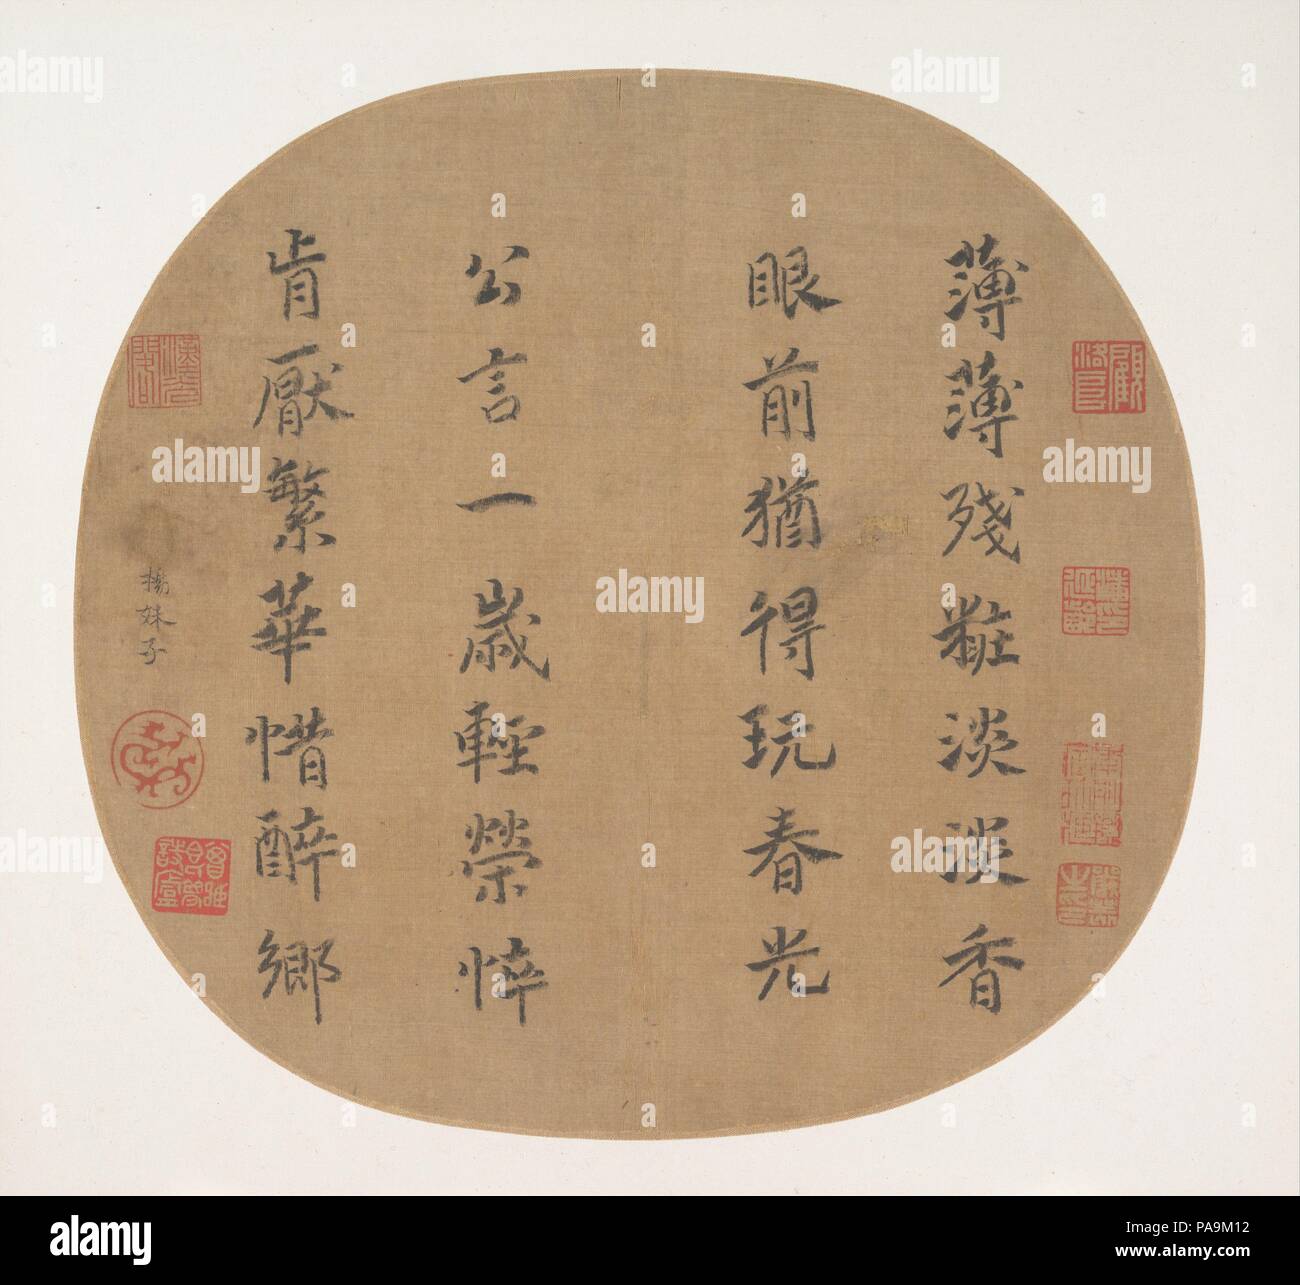 Quatrain on spring's radiance. Artist: Empress Yang Meizi (Chinese, 1162-1232). Culture: China. Dimensions: Image: 9 1/8 x 9 5/8 in. (23.2 x 24.4 cm). Date: early 13th century.  During the Southern Song, artists and connoisseurs who wished to express their emotional responses to paintings frequently added poems to them. Empress Yang's poems appear on a number of paintings by such court artists as Ma Yuan (active ca. 1190-1225) and Ma Lin (active ca. 1180-after 1256); this quatrain must once have complemented a fan painting of flowers, but it reveals more about the state of mind of the empress  Stock Photo